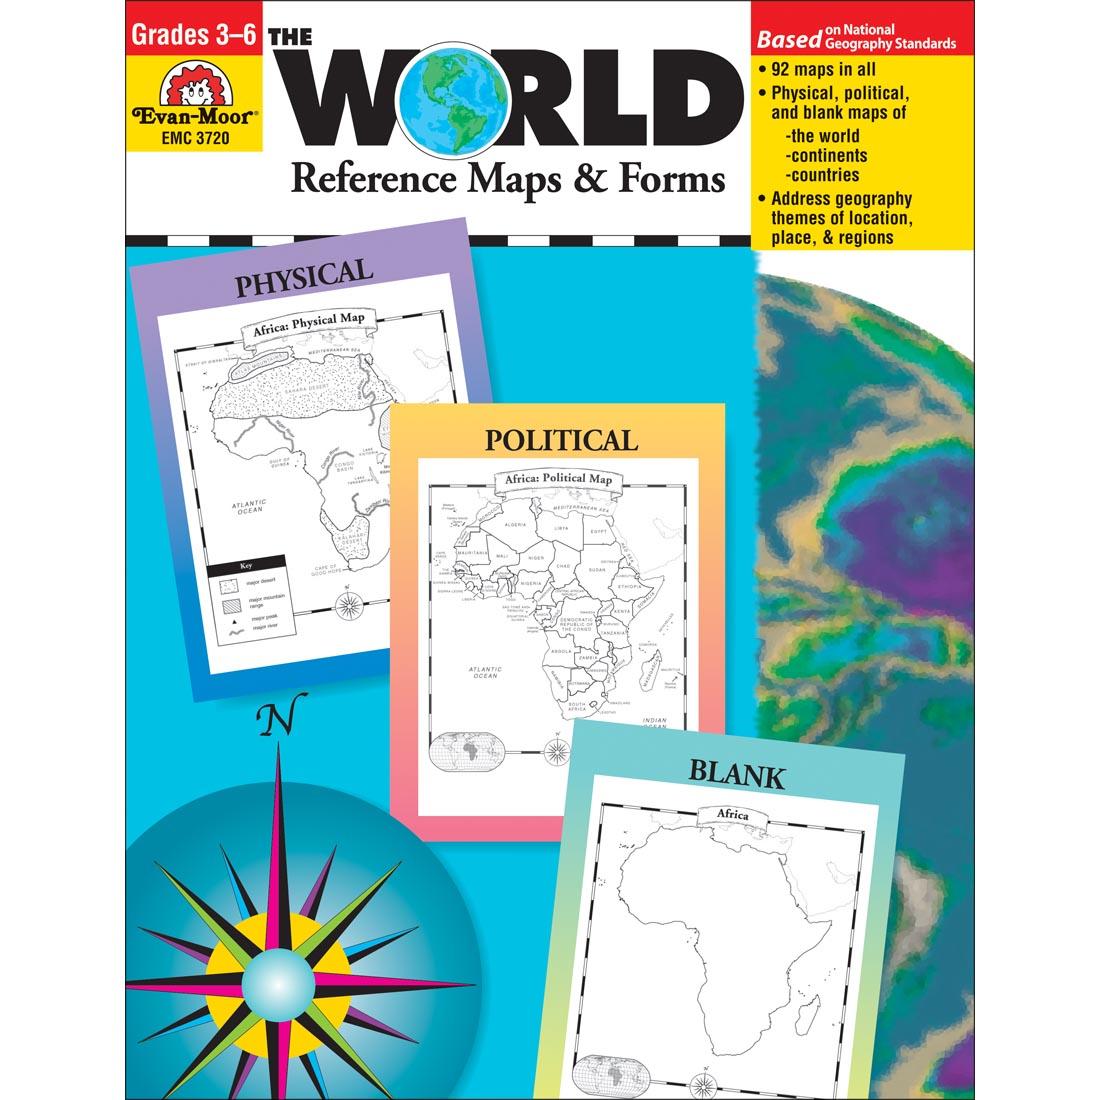 The World Reference Maps & Forms by Evan-Moor